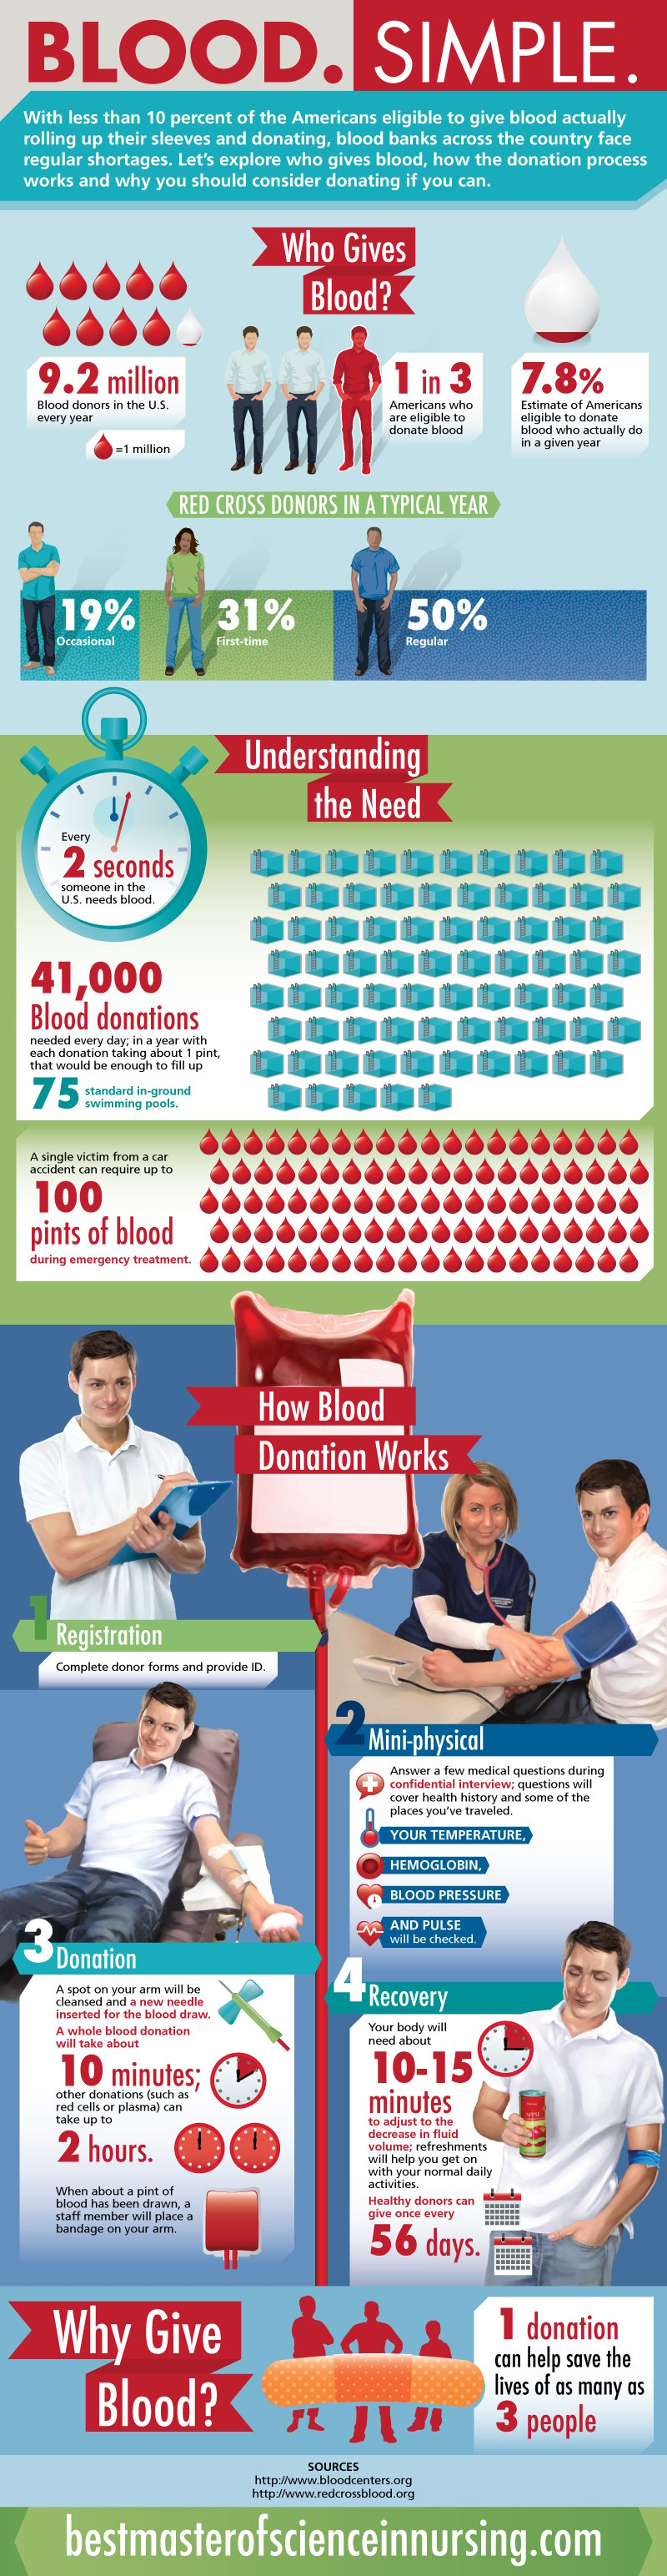 Who Donates Blood...
How Does it Work...
Who Does it Help?